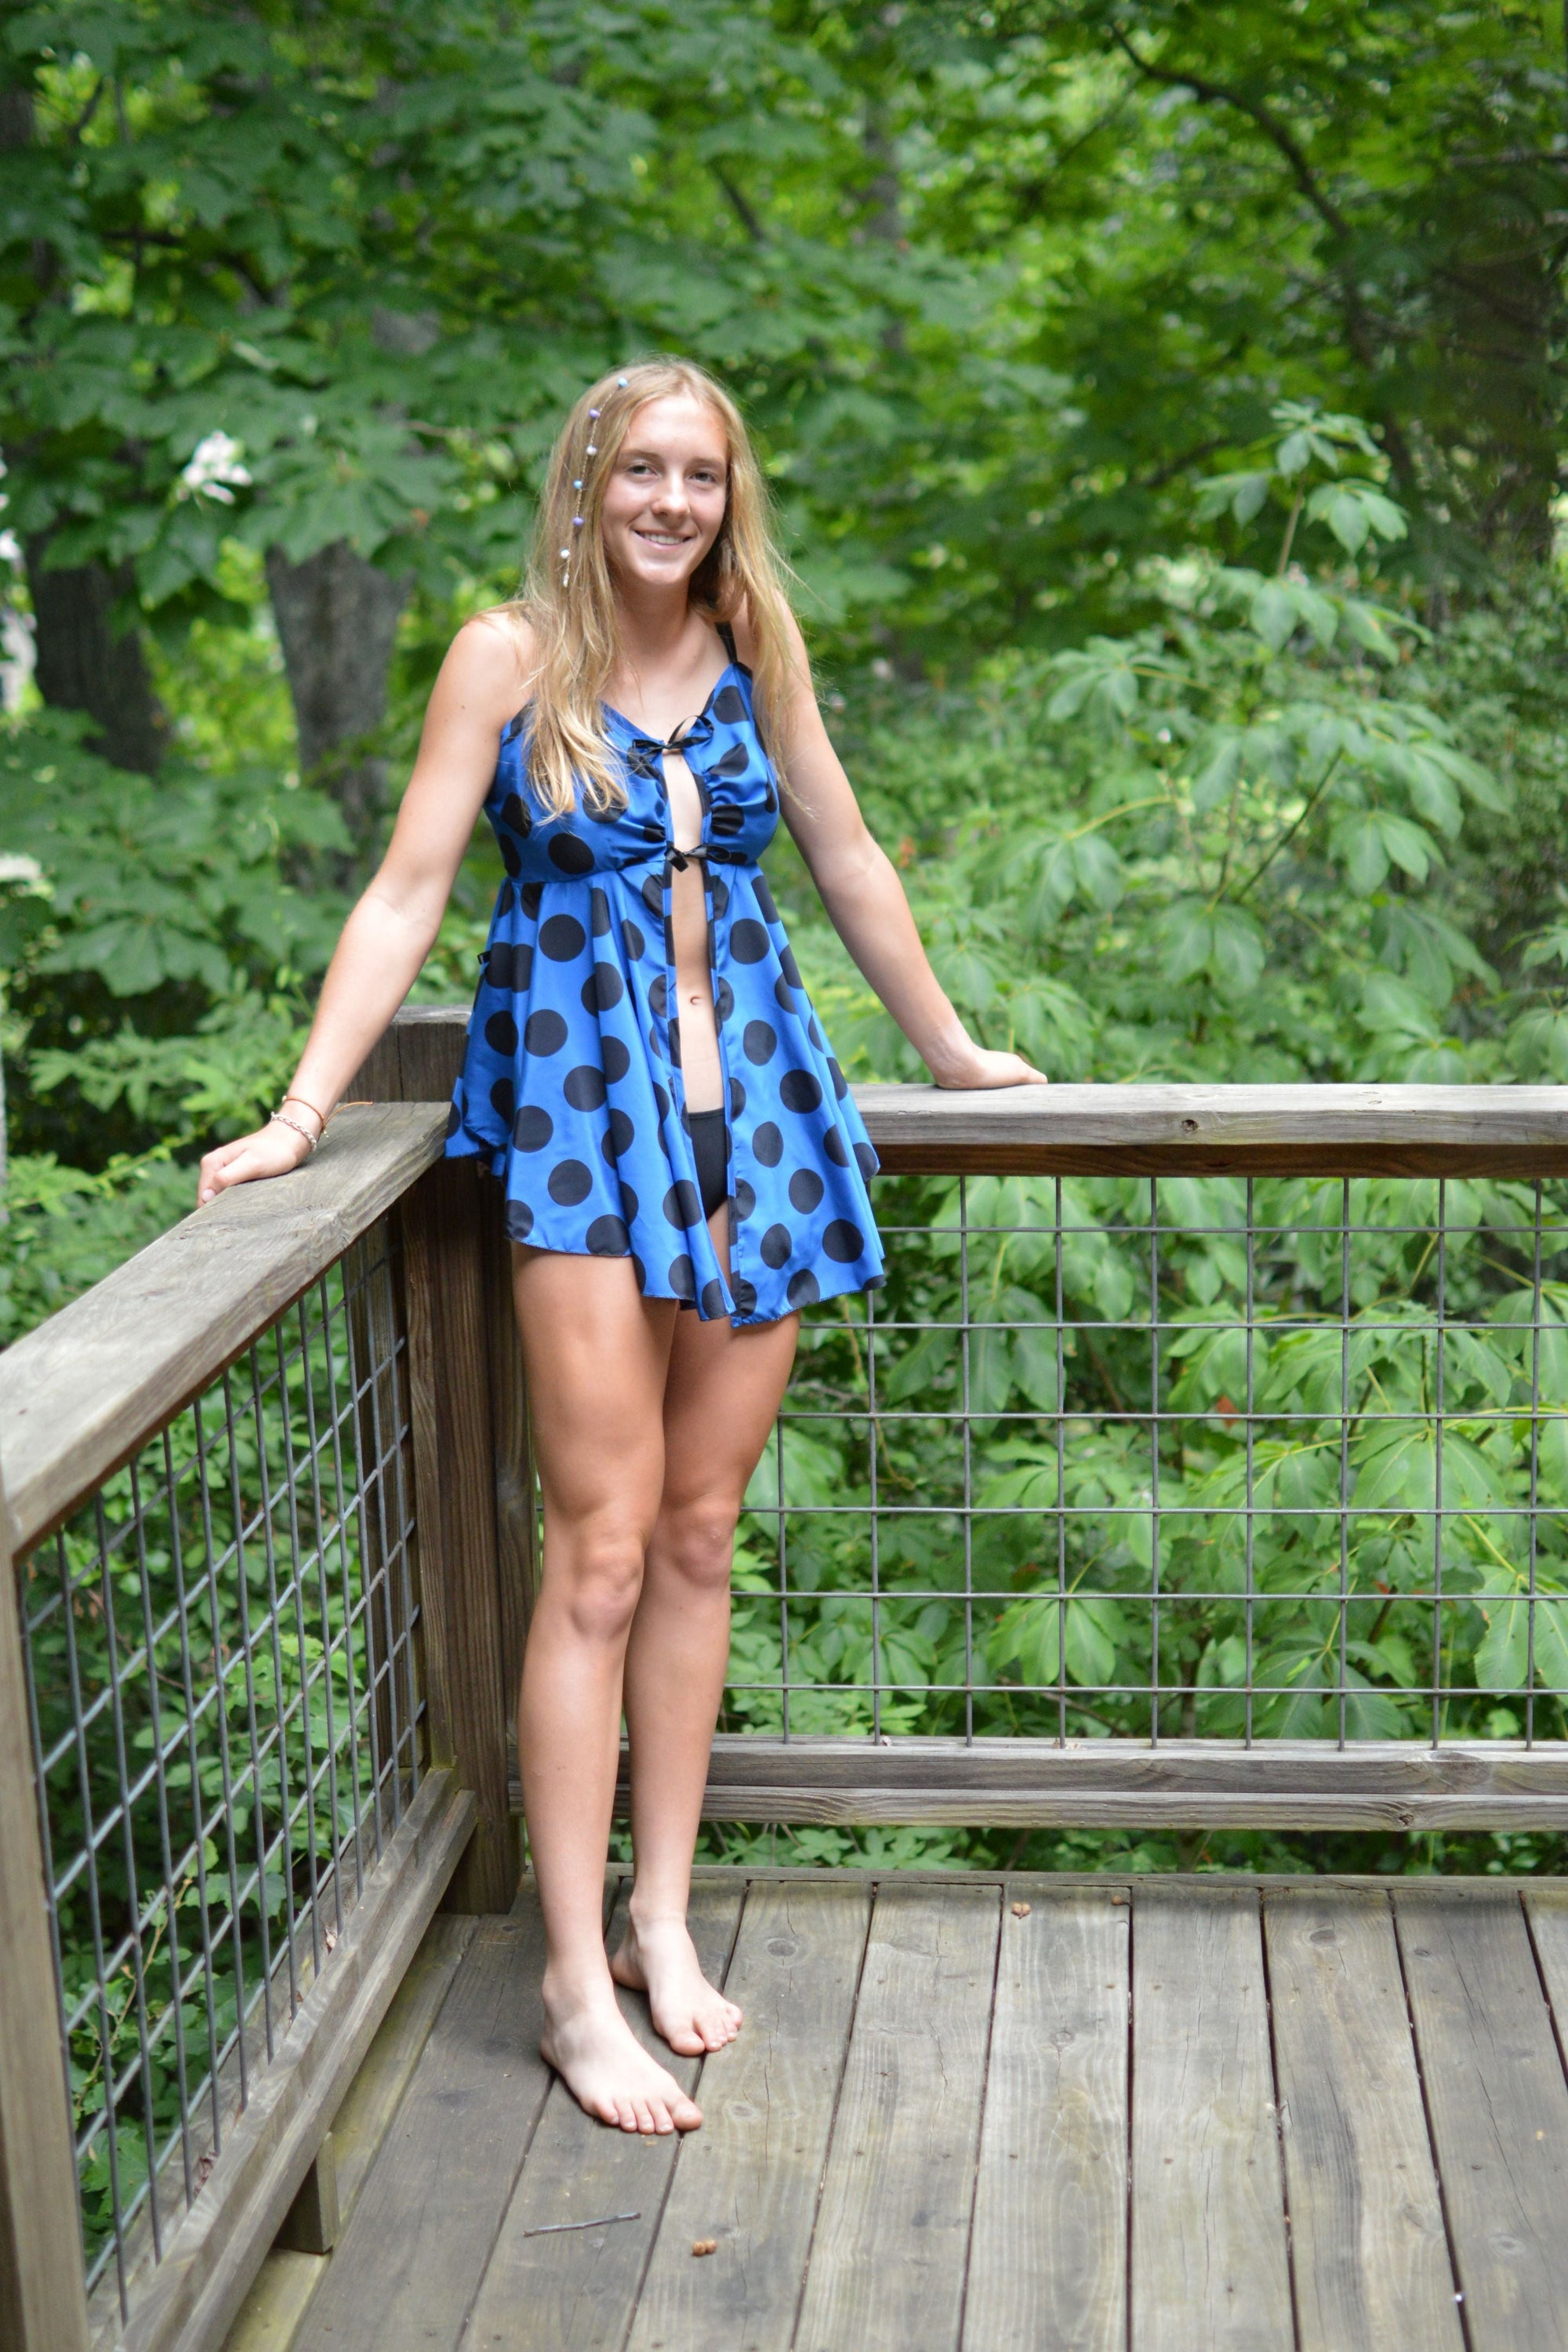 Woman standing on a wooden porch in the woods wearing a blue and black polka dot lingerie dress that is open in the center front and tied with black bows.